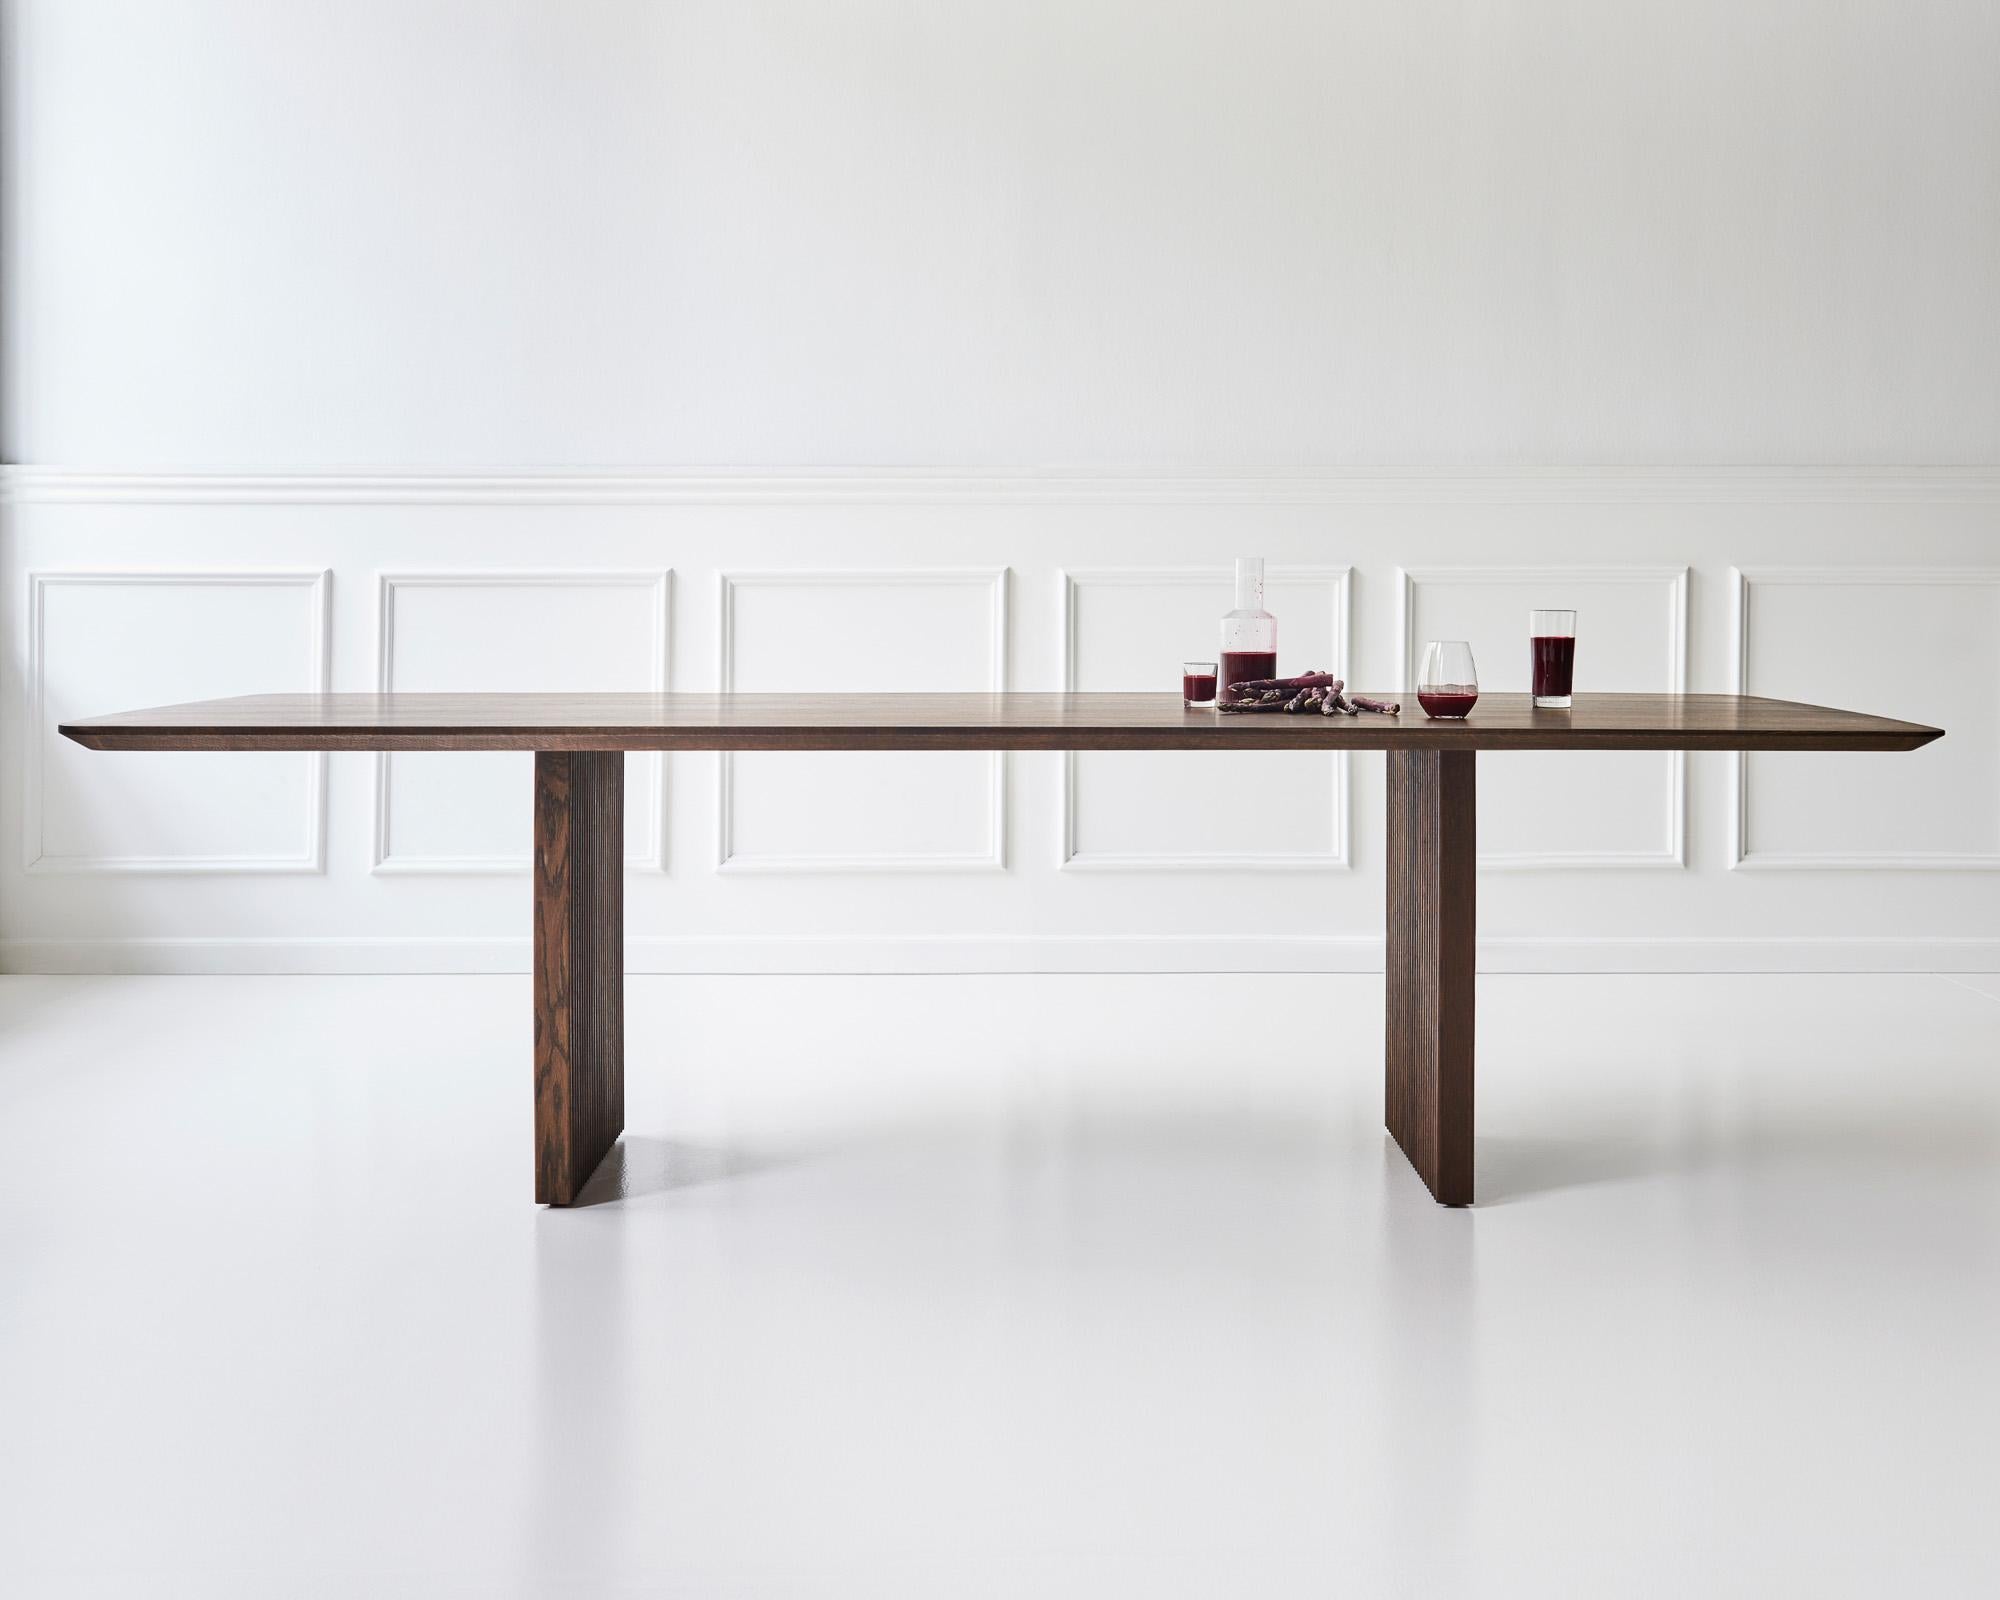 TEN dining table, rectangular, 300cm
Solid wood tabletop and legs

Height: 72 or 74 cm

Tabletop dimensions:
– 200 x 95 cm
– 240 x 105 cm
– 270 x 105 cm
– 300 x 105 cm
– 340 x 105 cm
– 370 x 105 cm
– 400 x 105 cm

Tabletop’s thickness: 3,4